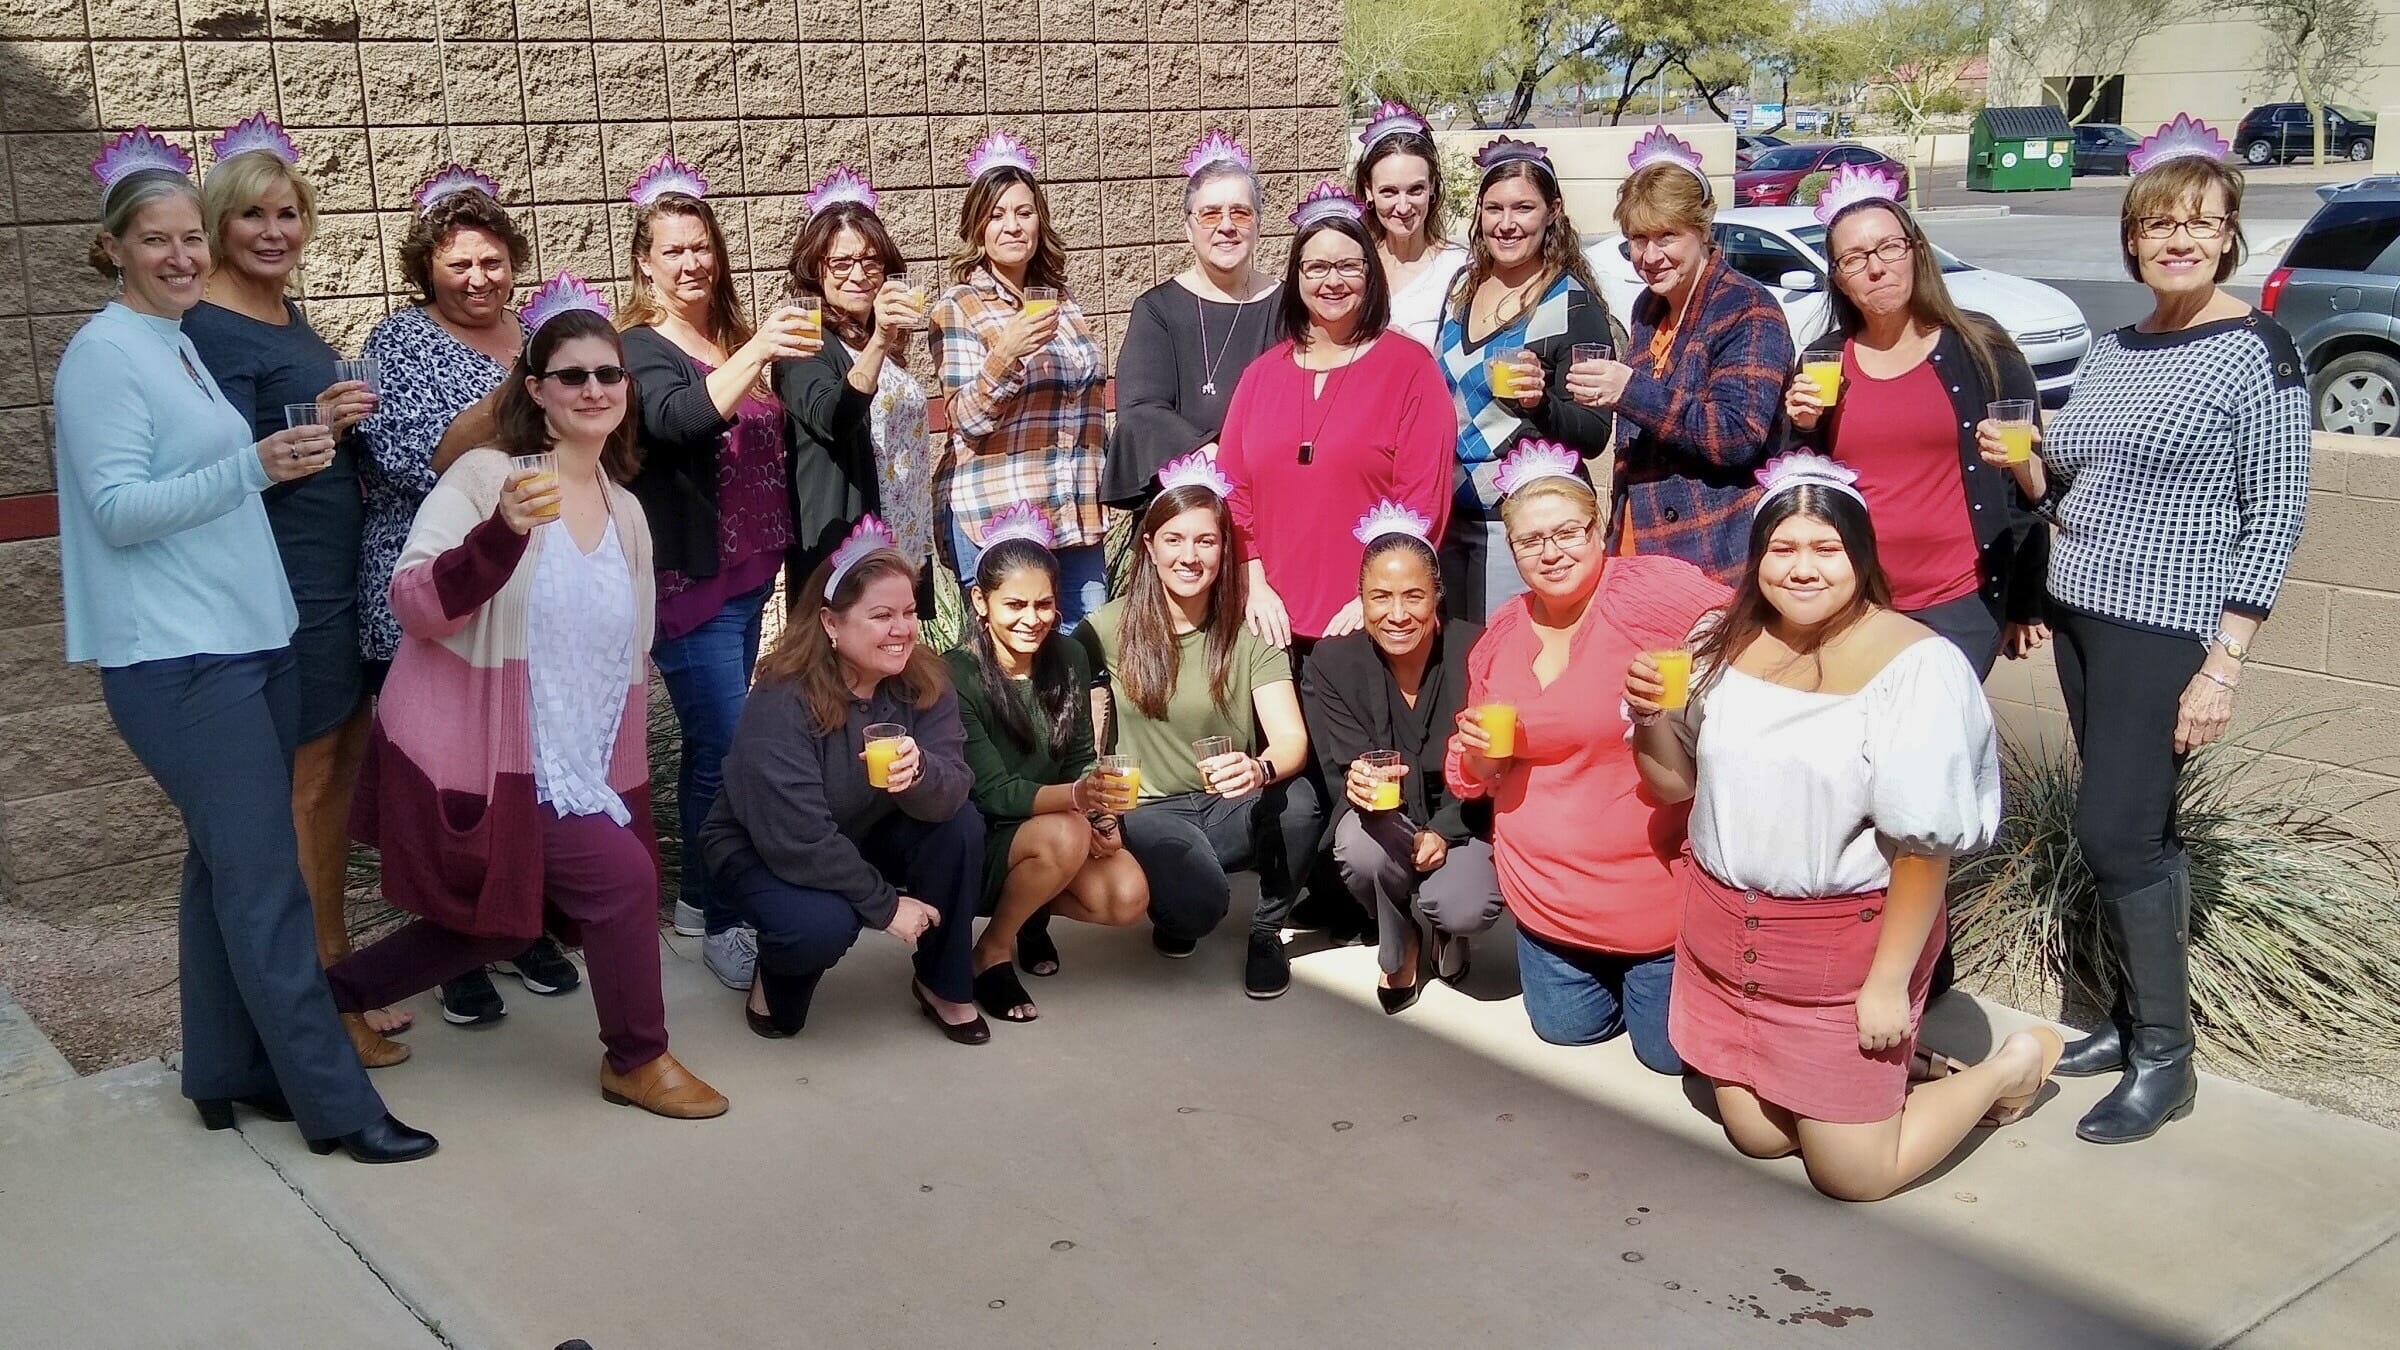 Caliente kicks off Women in Construction week with a lunch to honor its women who represent diversity and inclusion